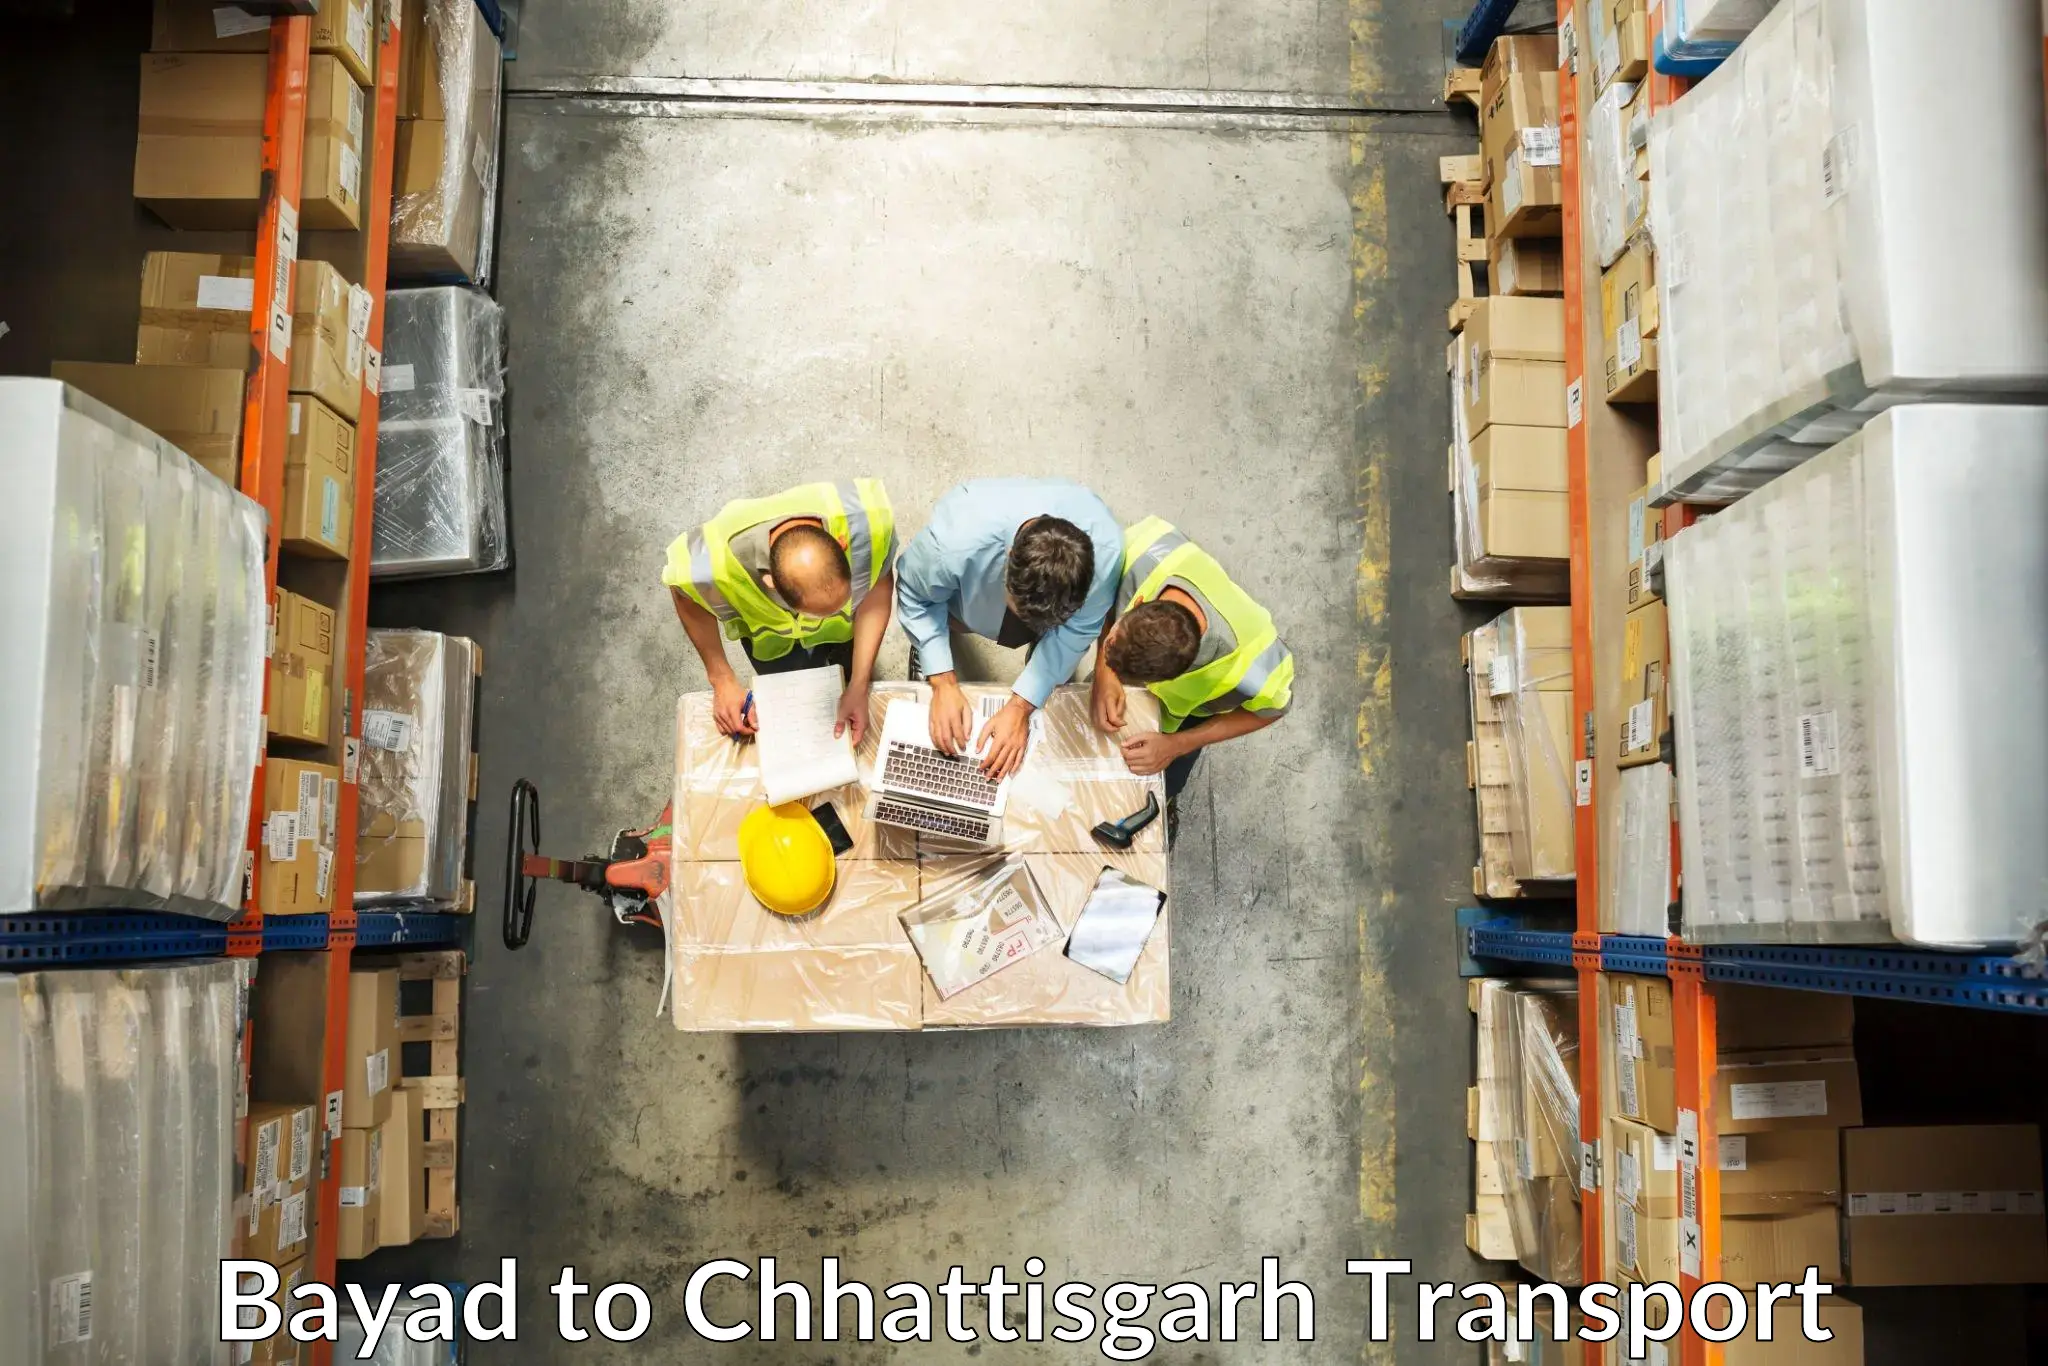 Truck transport companies in India in Bayad to Chirimiri